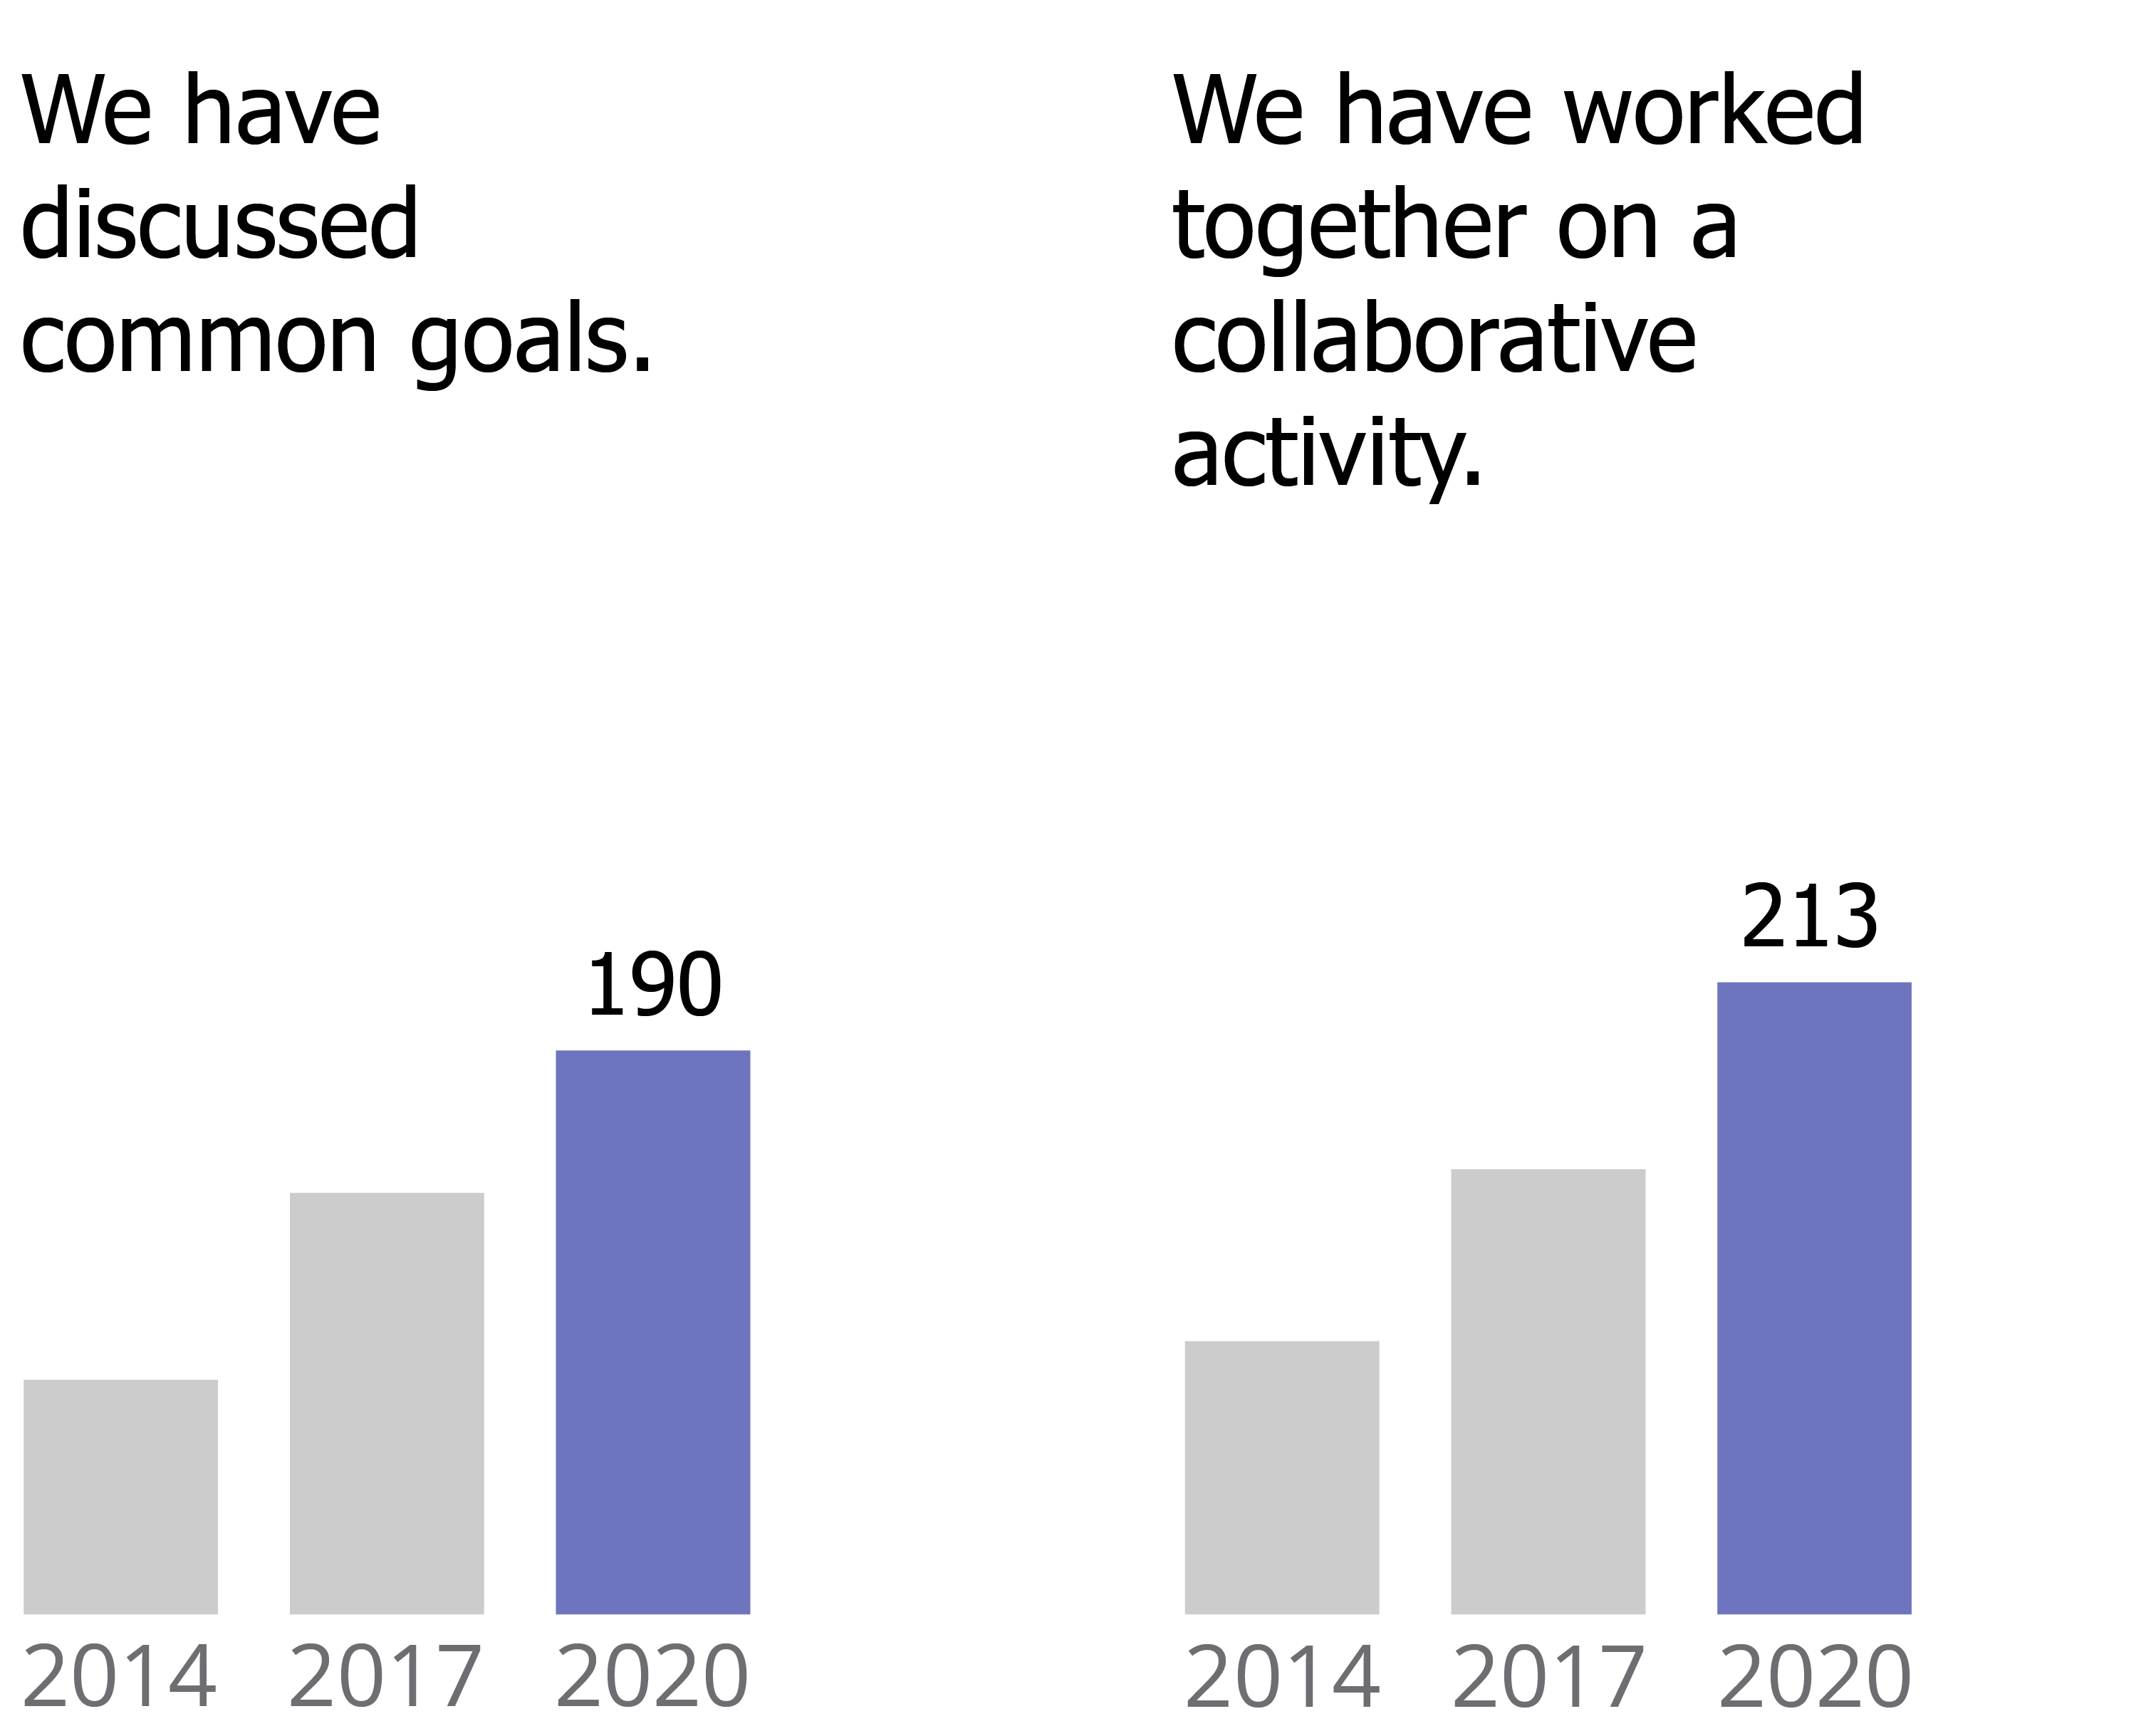 190 organizations reported discussing common goals in 2020 compared to 79 in 2014. 213 reported working together on a collaborative activity in 2020 compared to 92 in 2014.